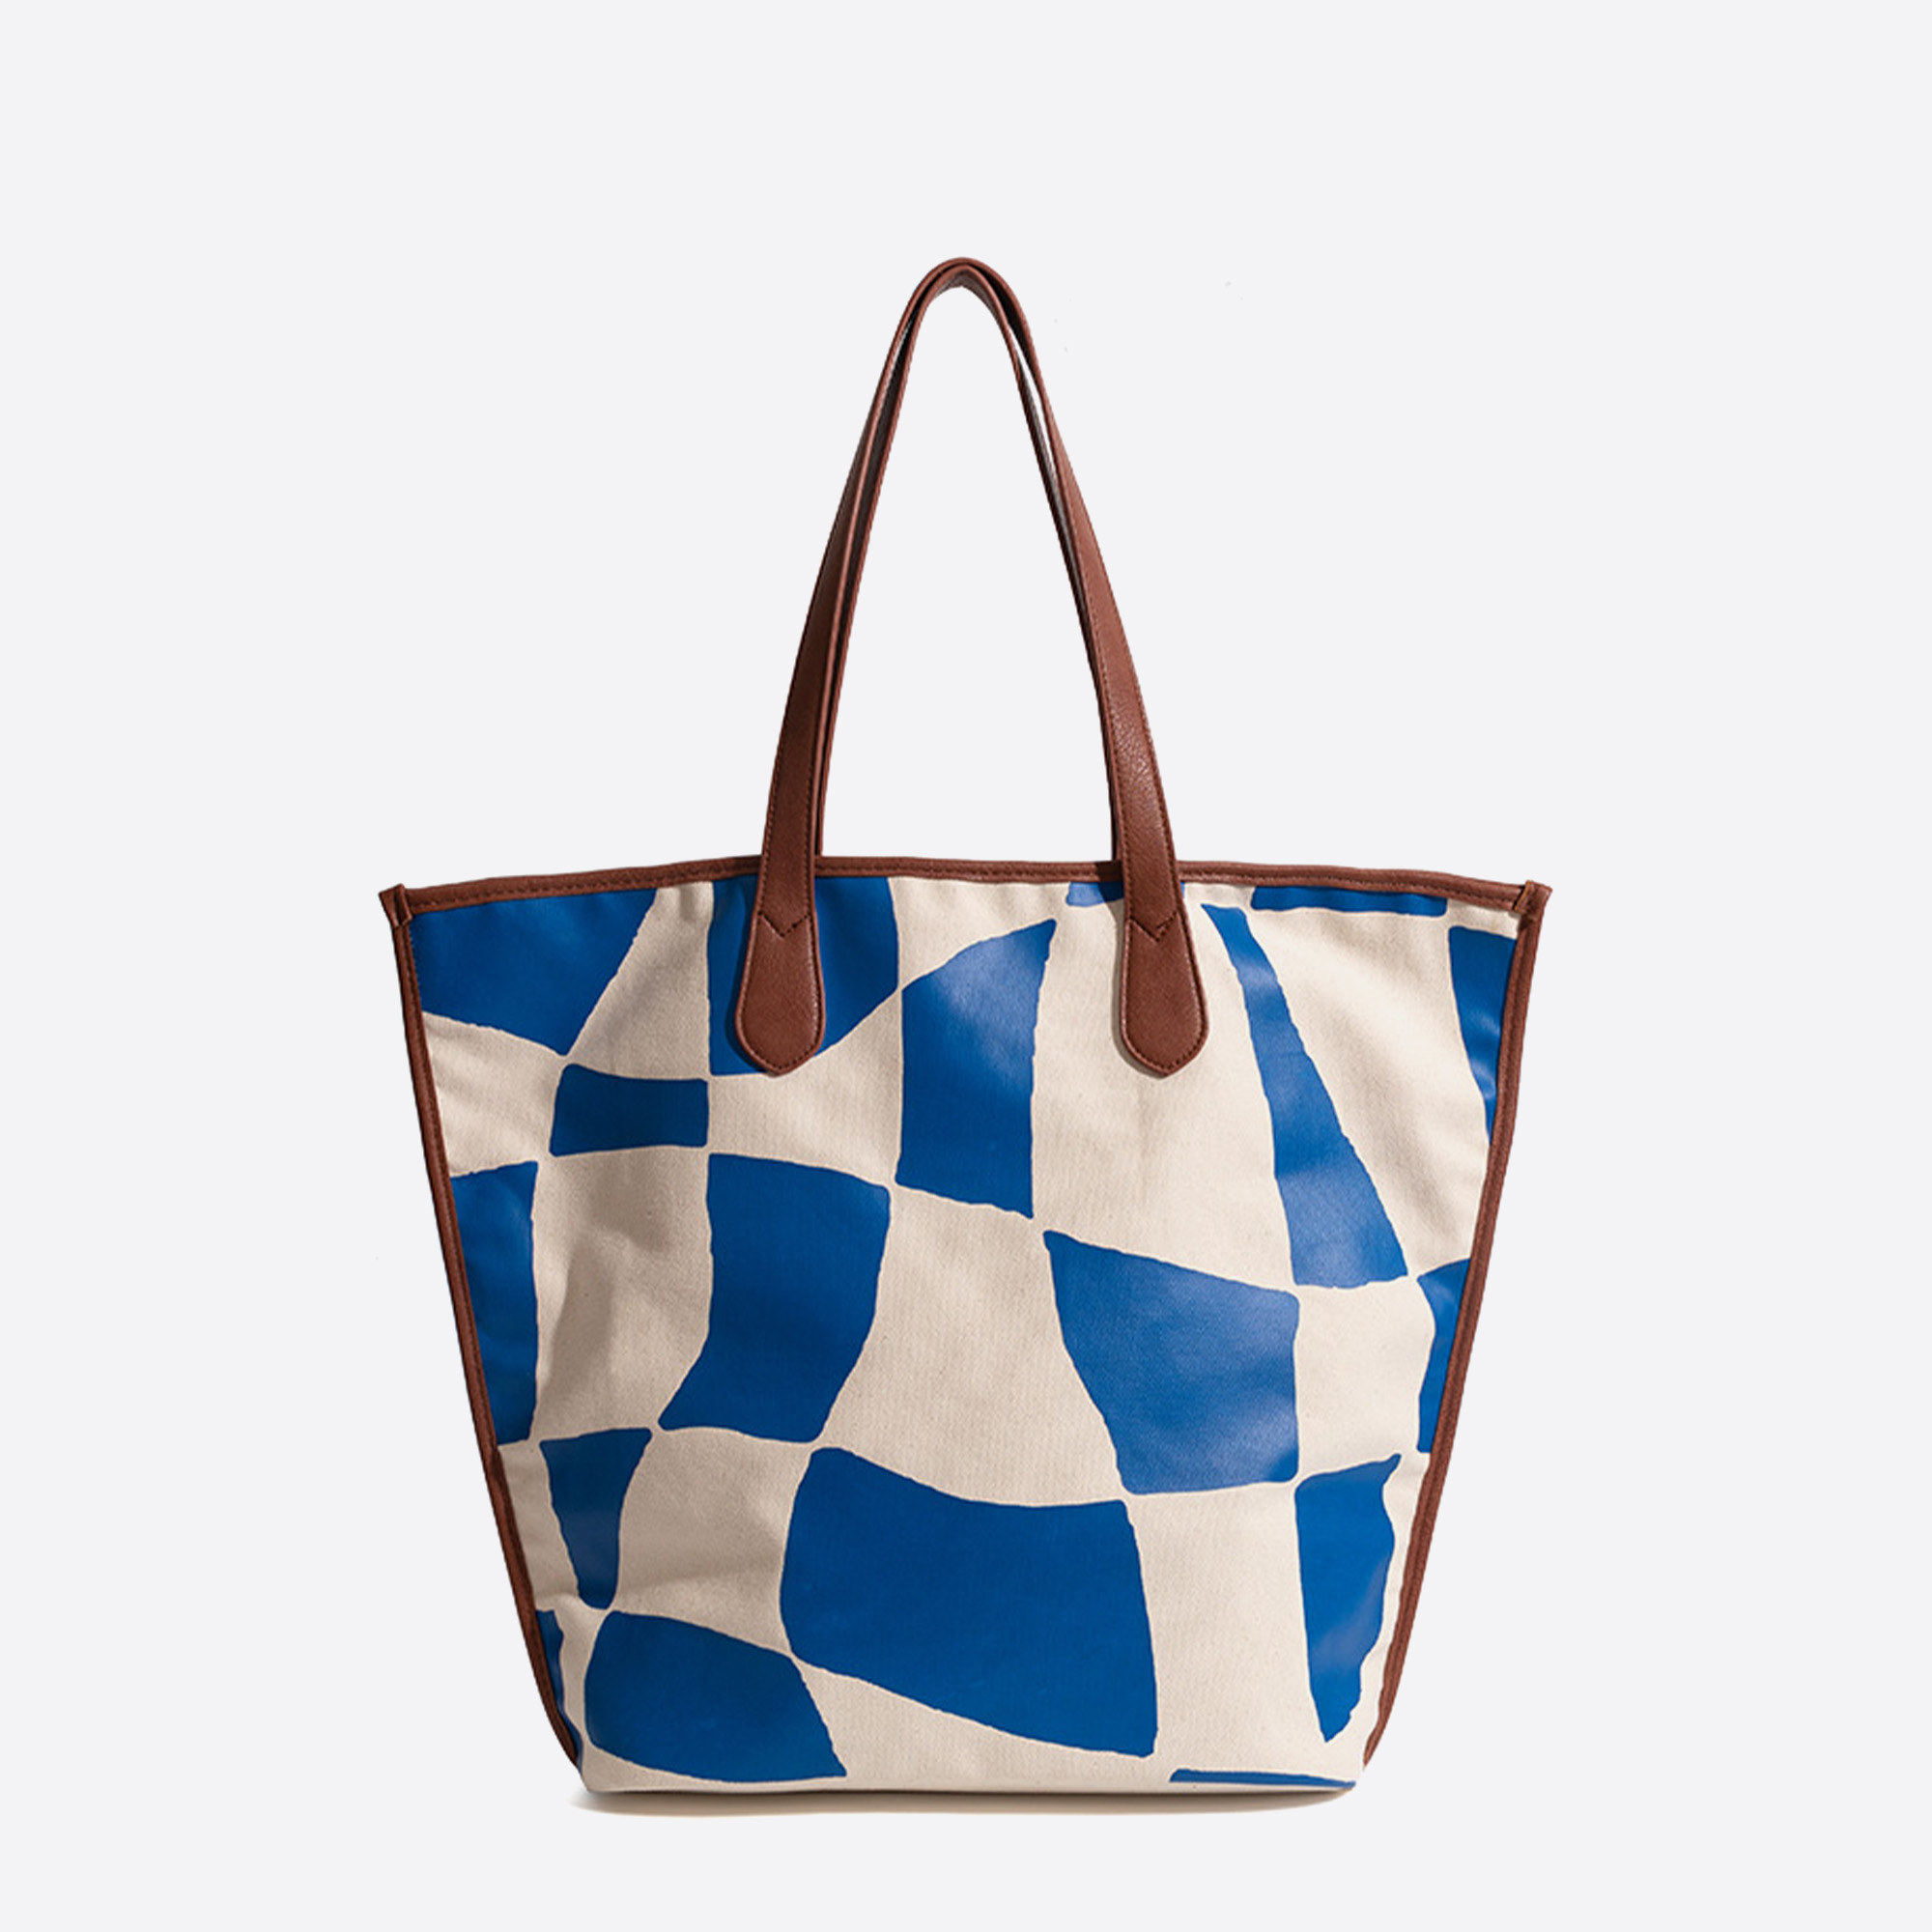 Checkerboard Patterned Top Handle Tote